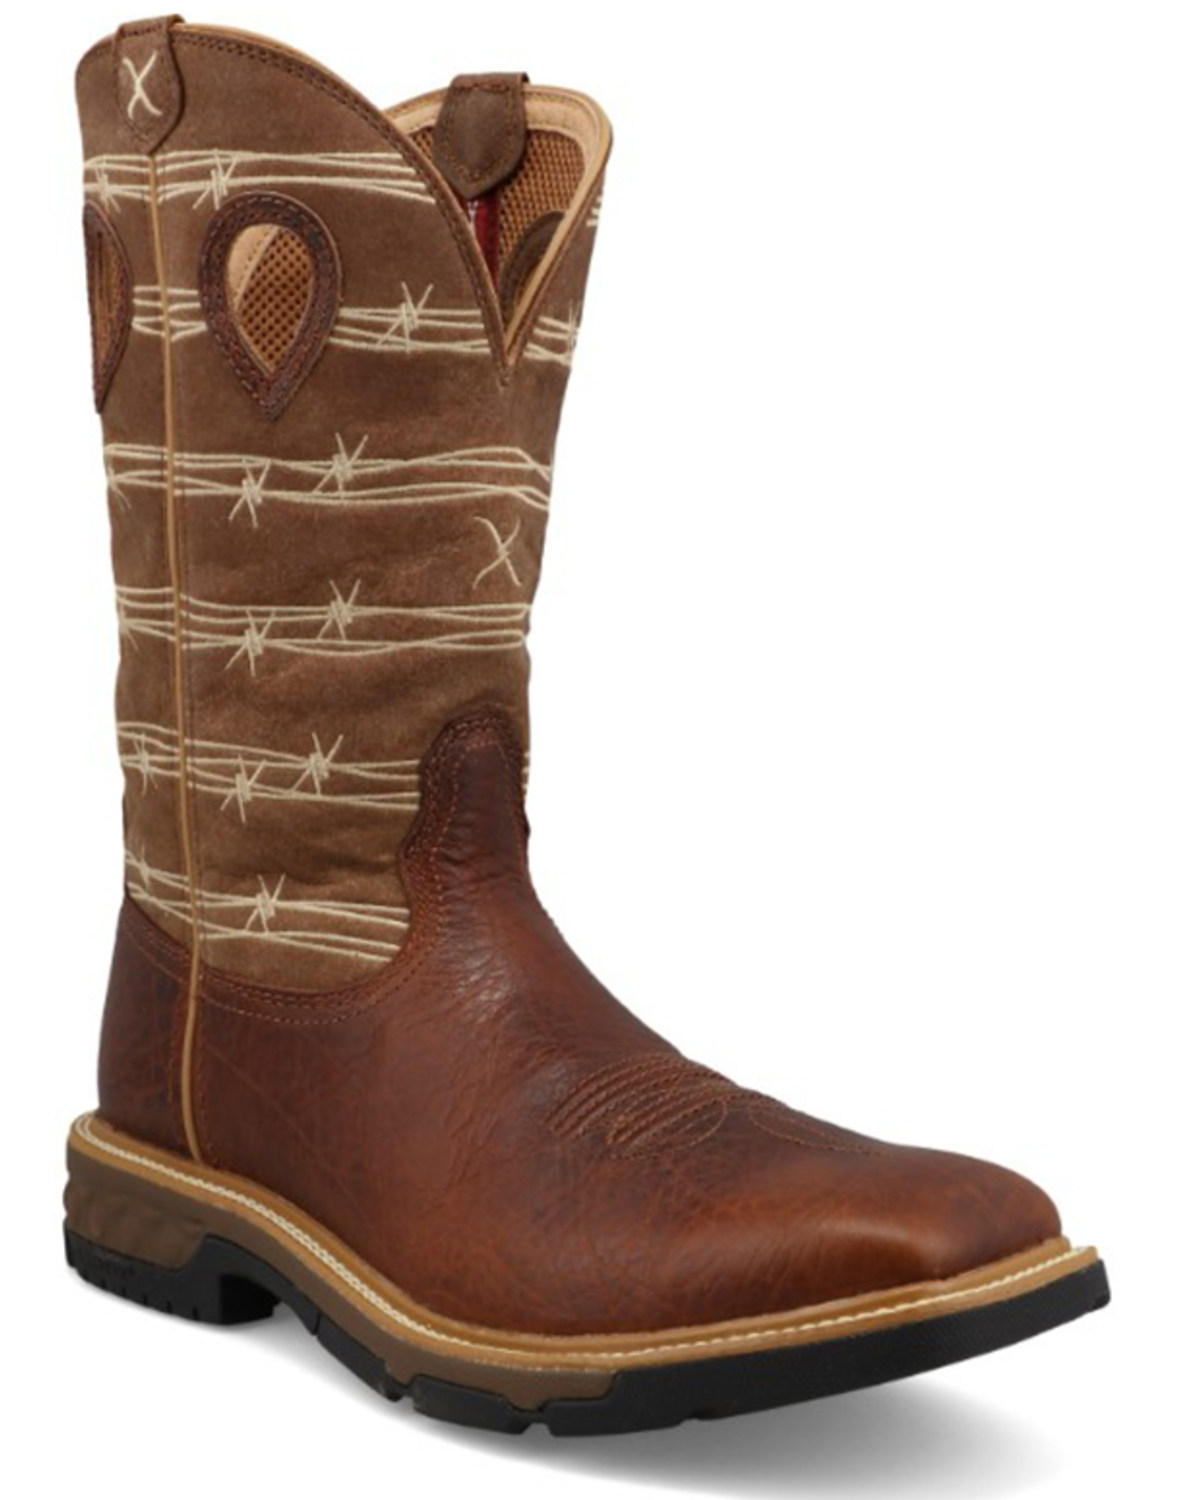 Twisted X Men's 12" Western Work Boots